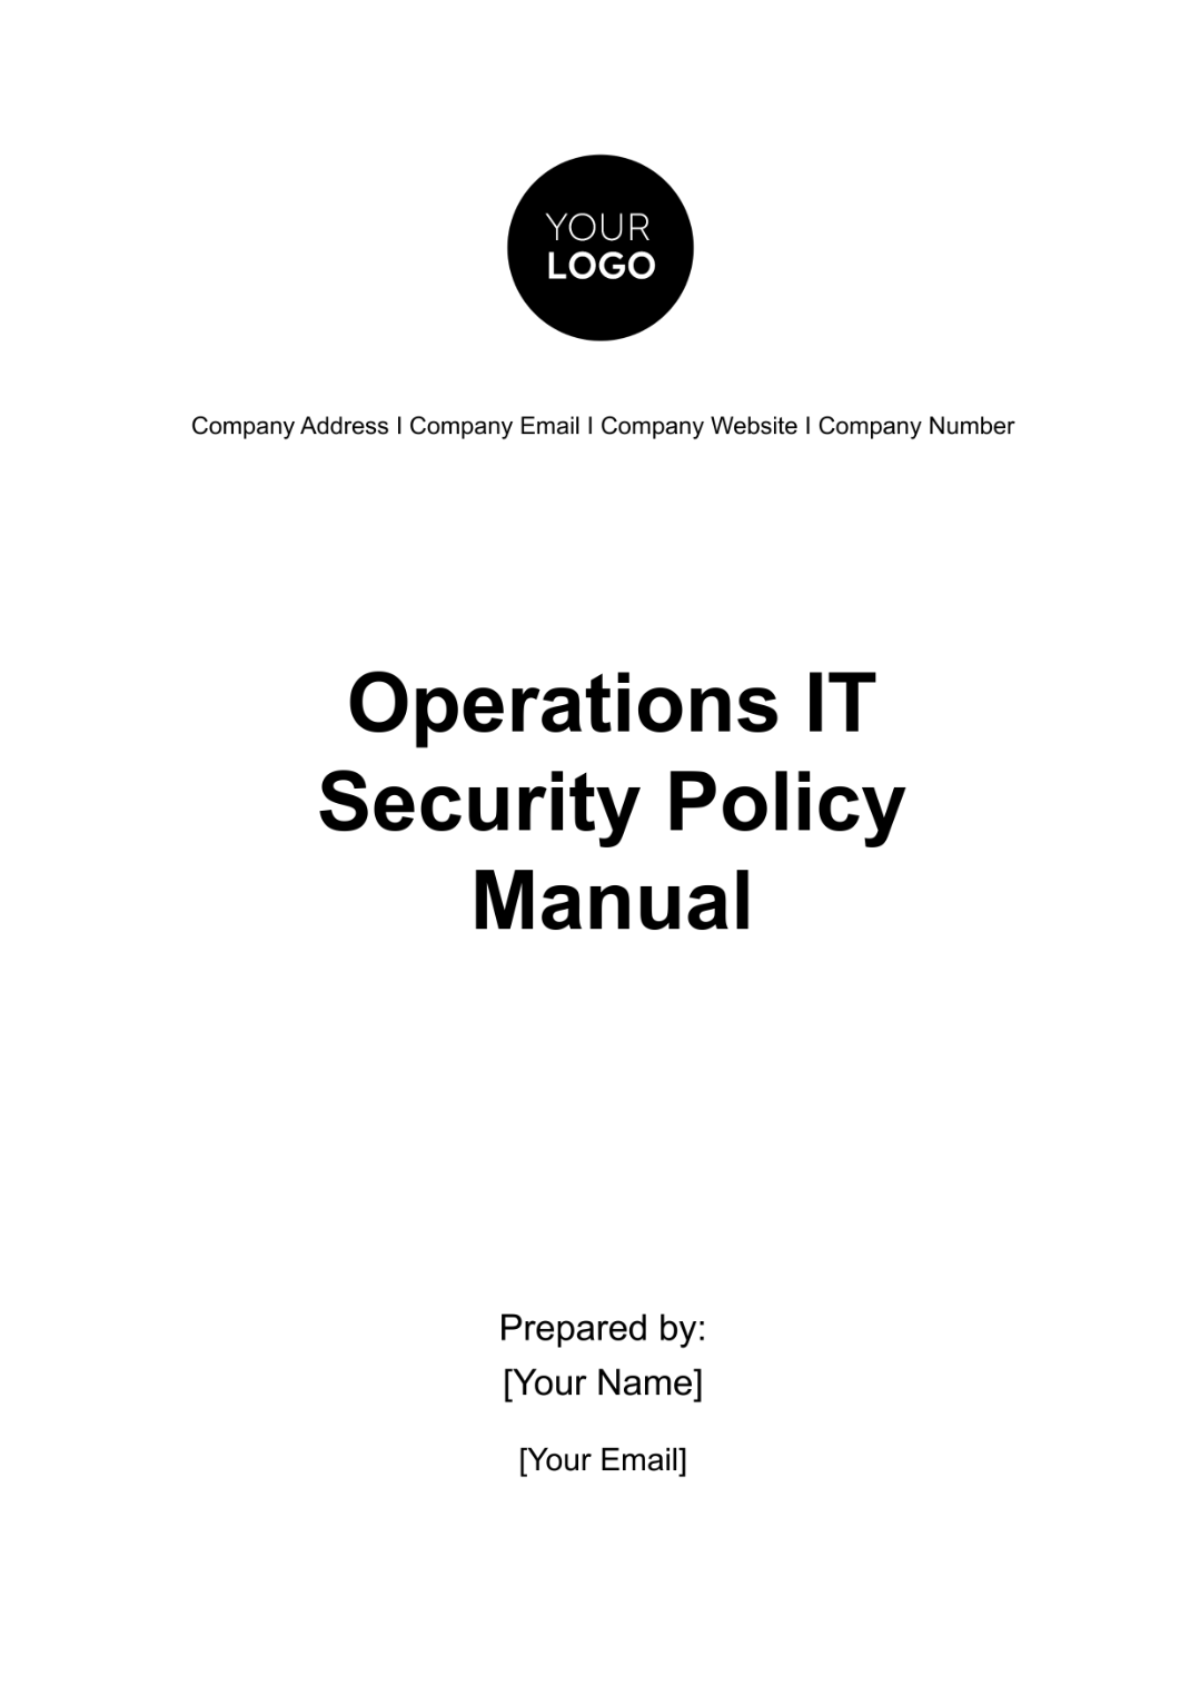 Operations IT Security Policy Manual Template